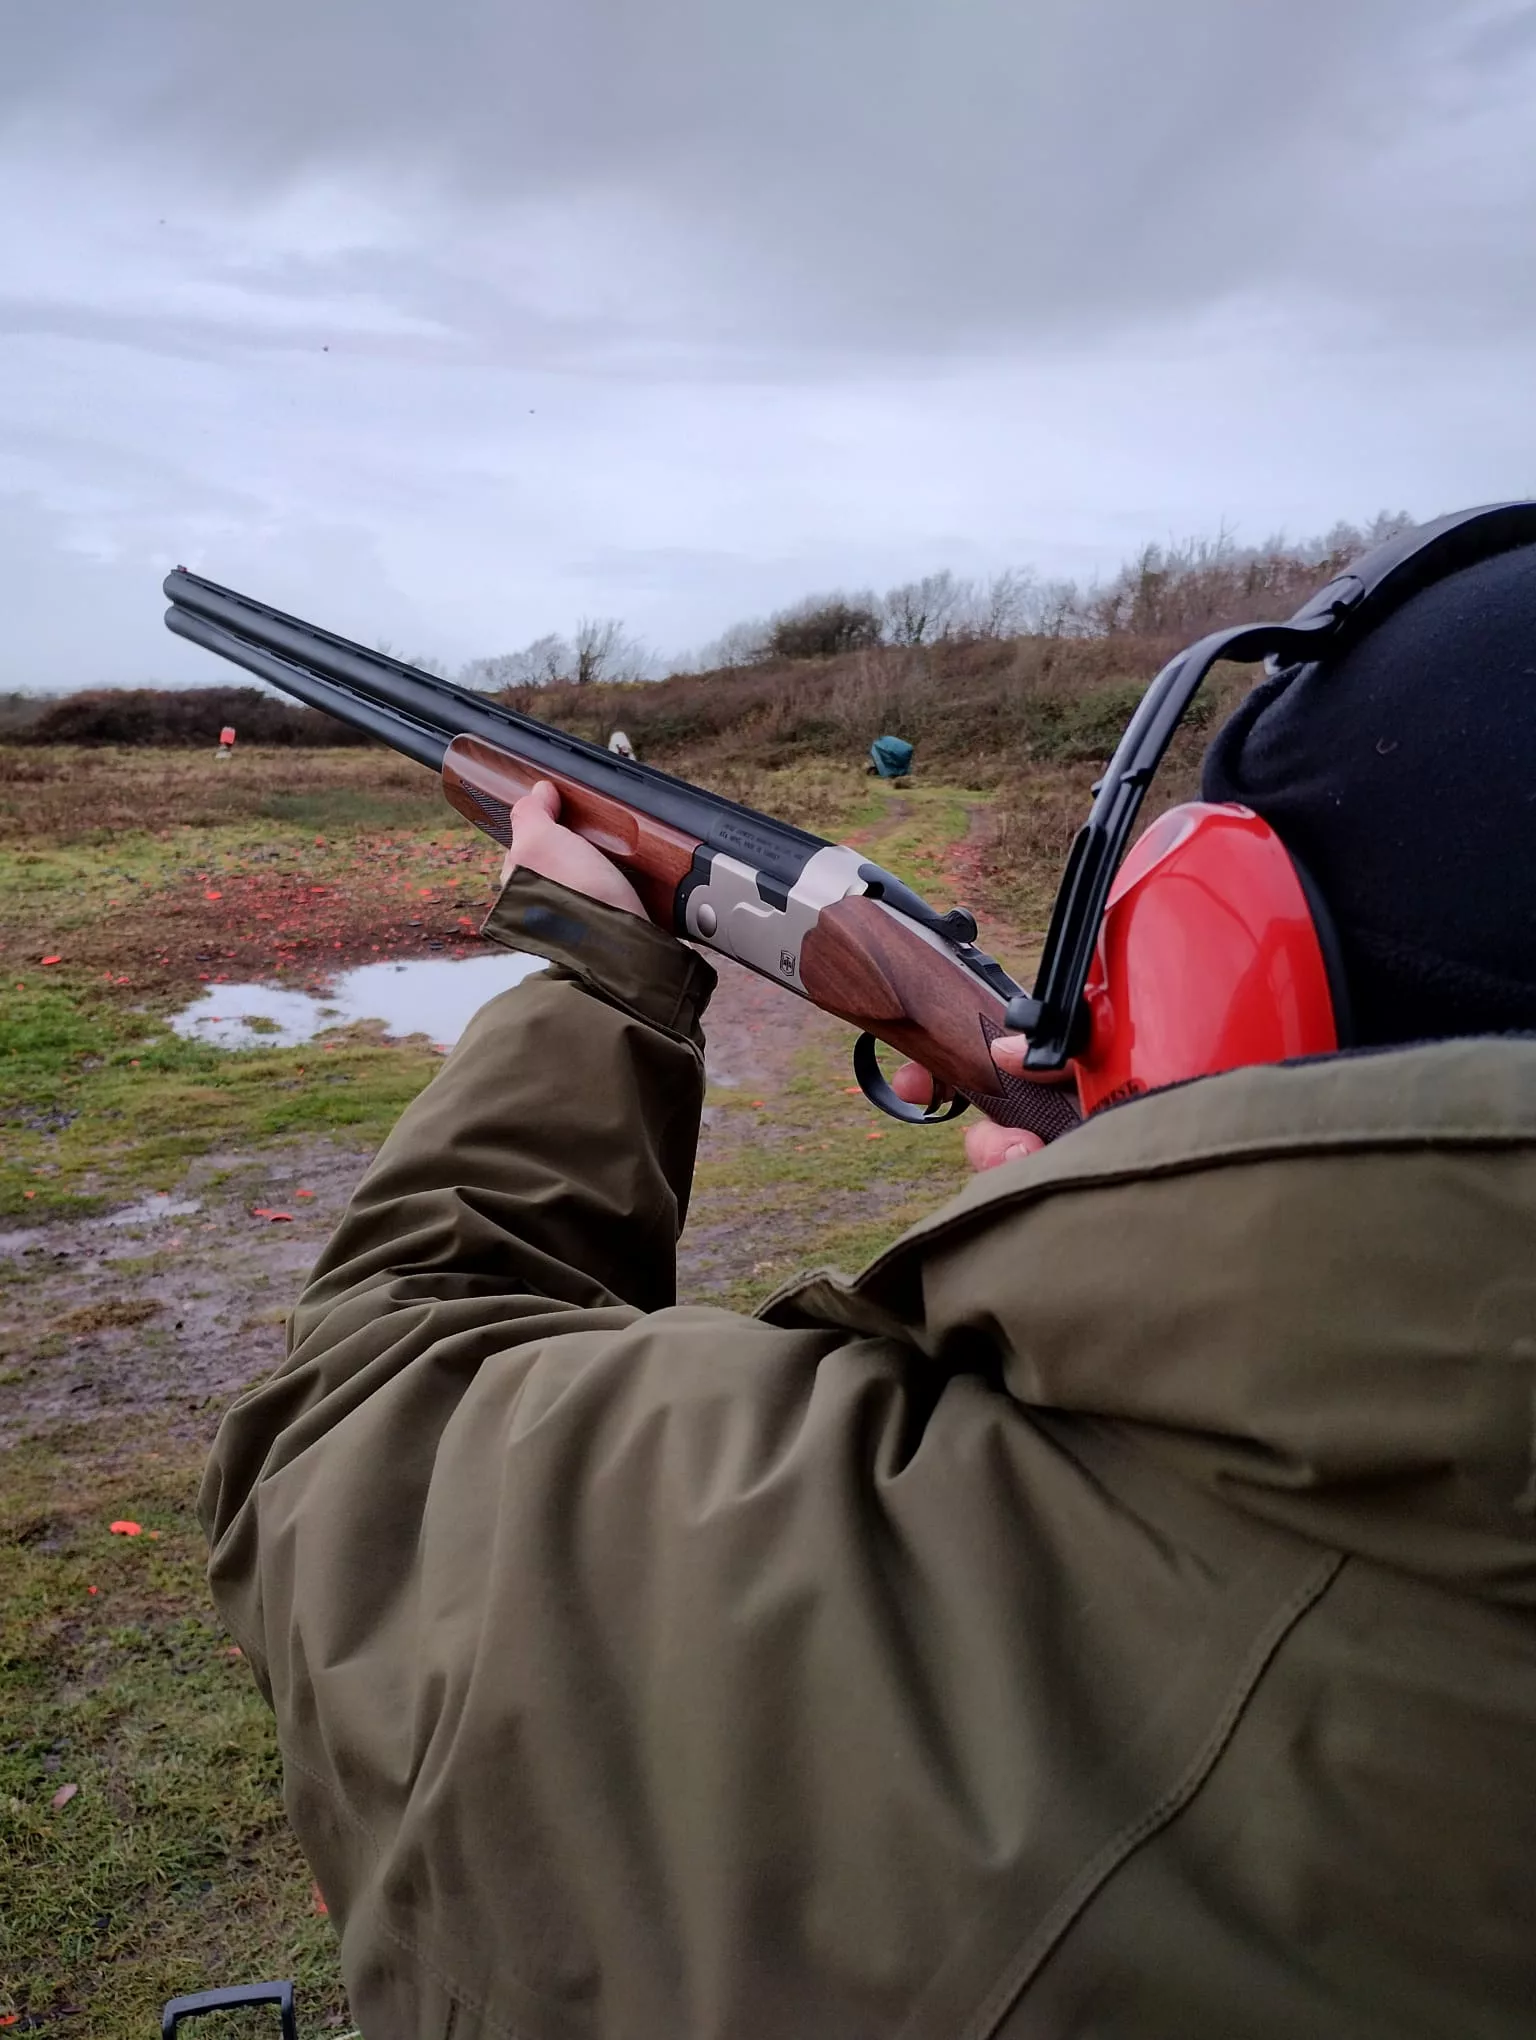 Man taking aim with a shotgun during a clay pigeon shooting activity